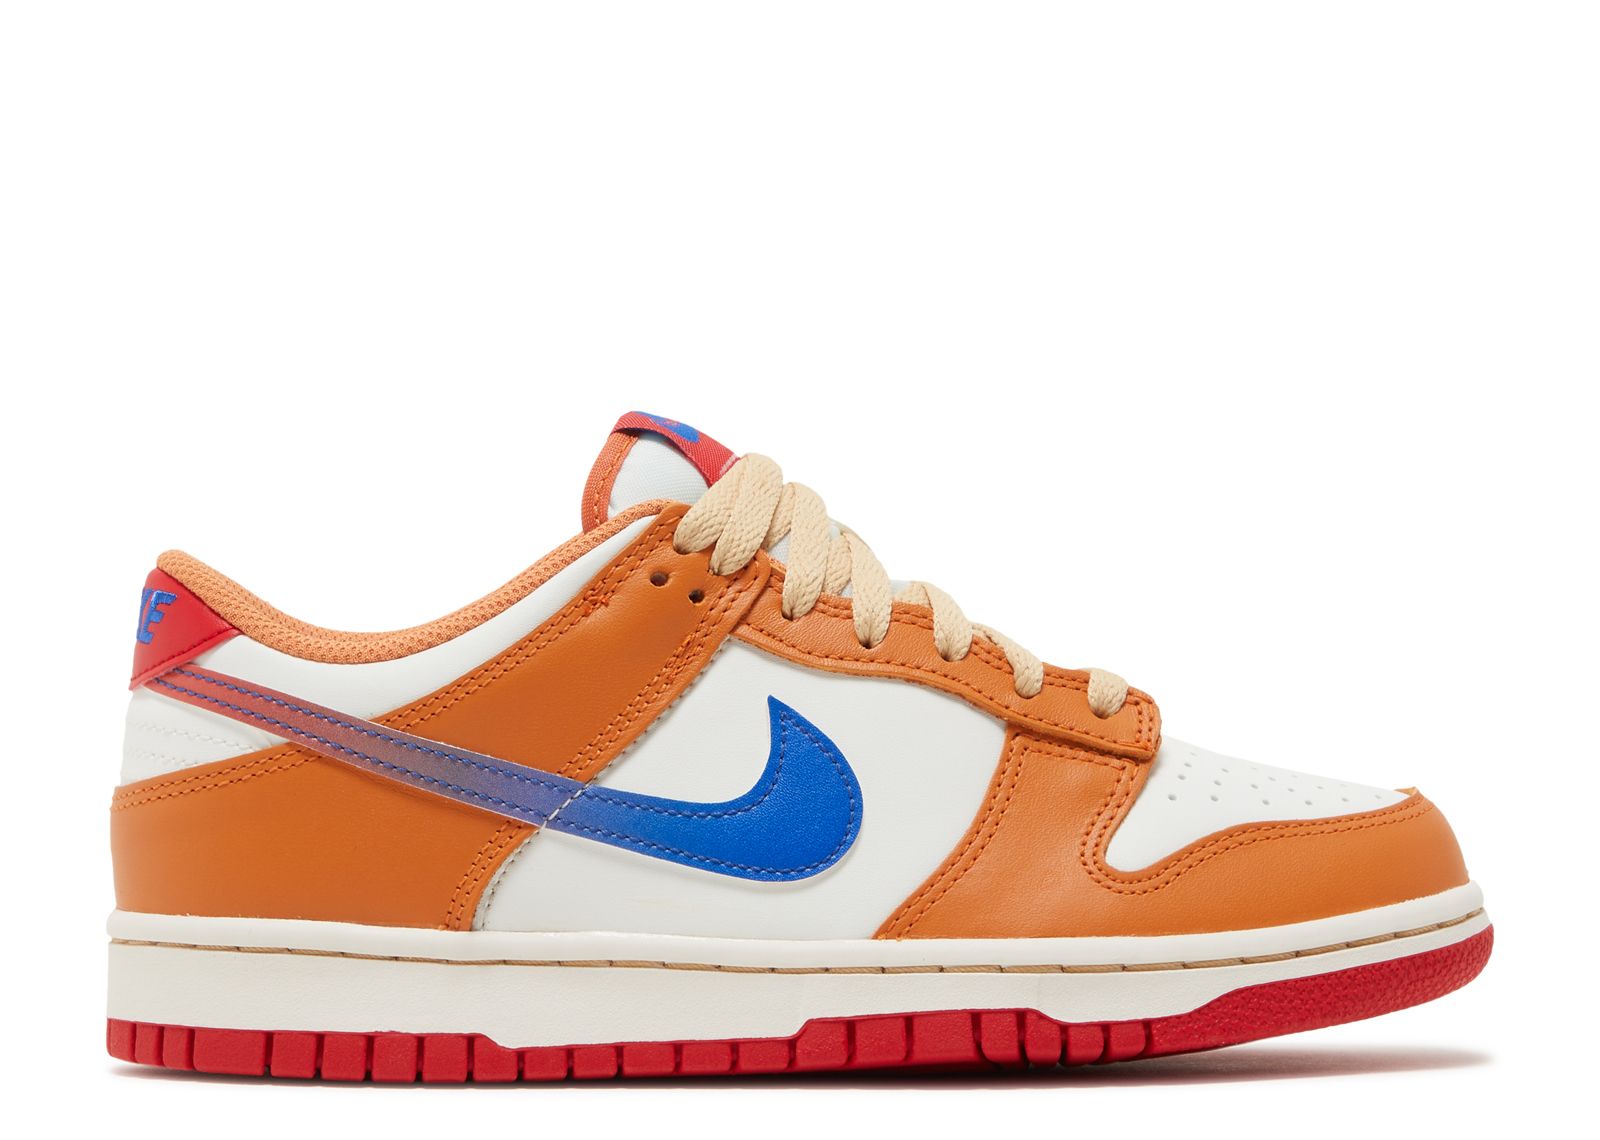 Dunk Low GS 'Hot Curry' Nike - DH9765 101 sail/university red/hot curry/game royal | Flight Club